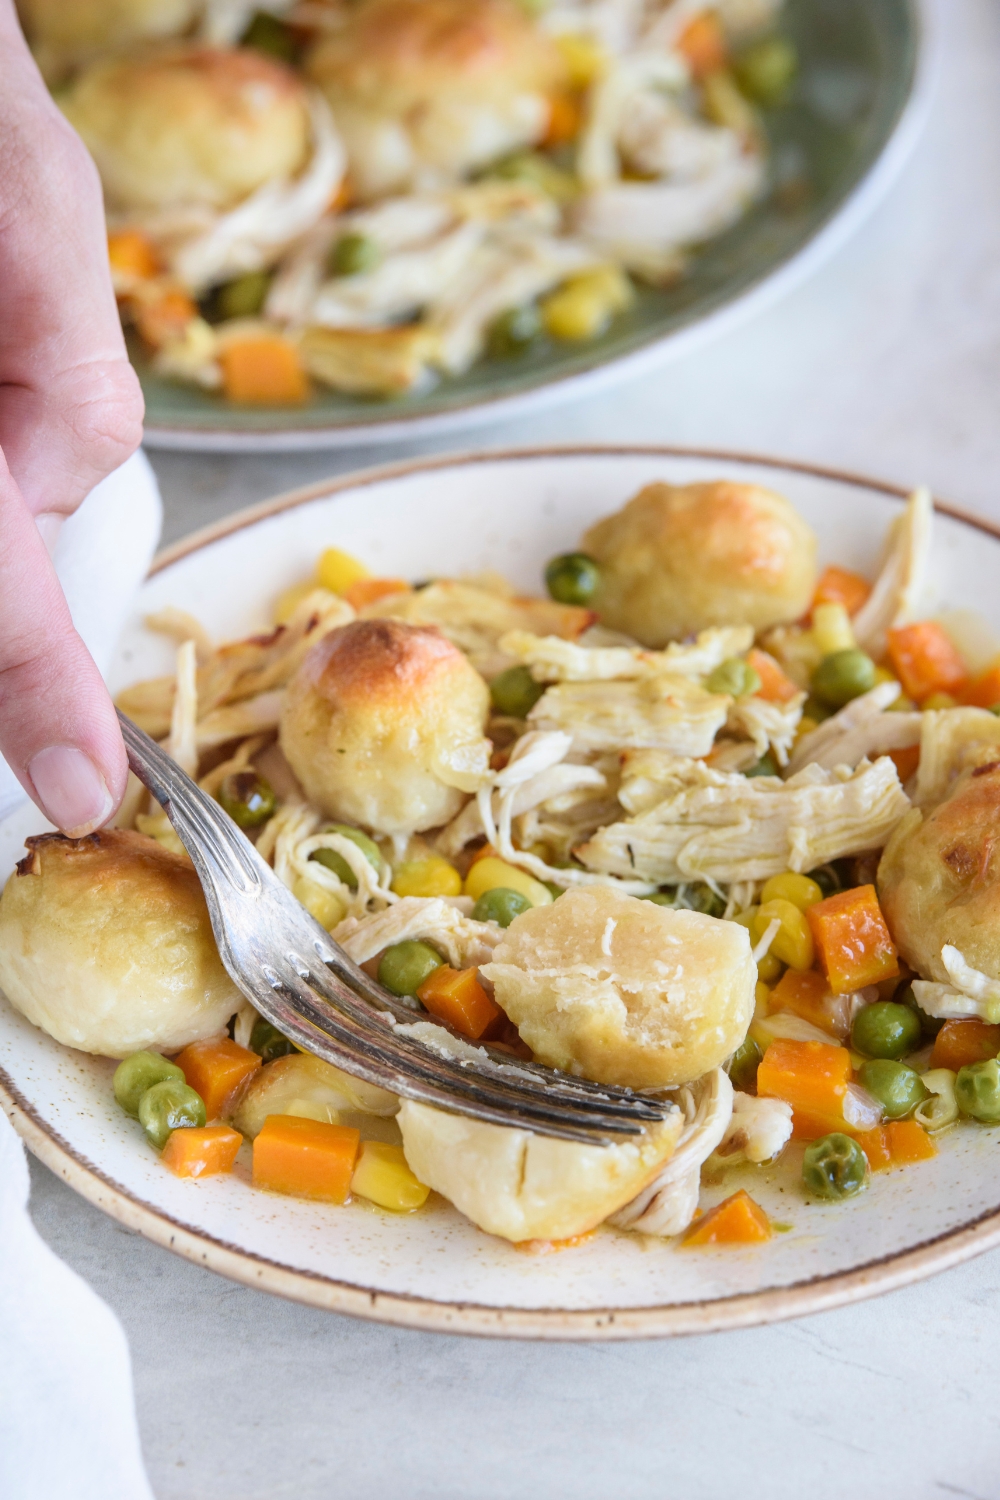 A hand holding a fork cutting a dumpling in half. The dumpling is on a plate with peas, carrots, corn, shredded chicken, and more dumplings.